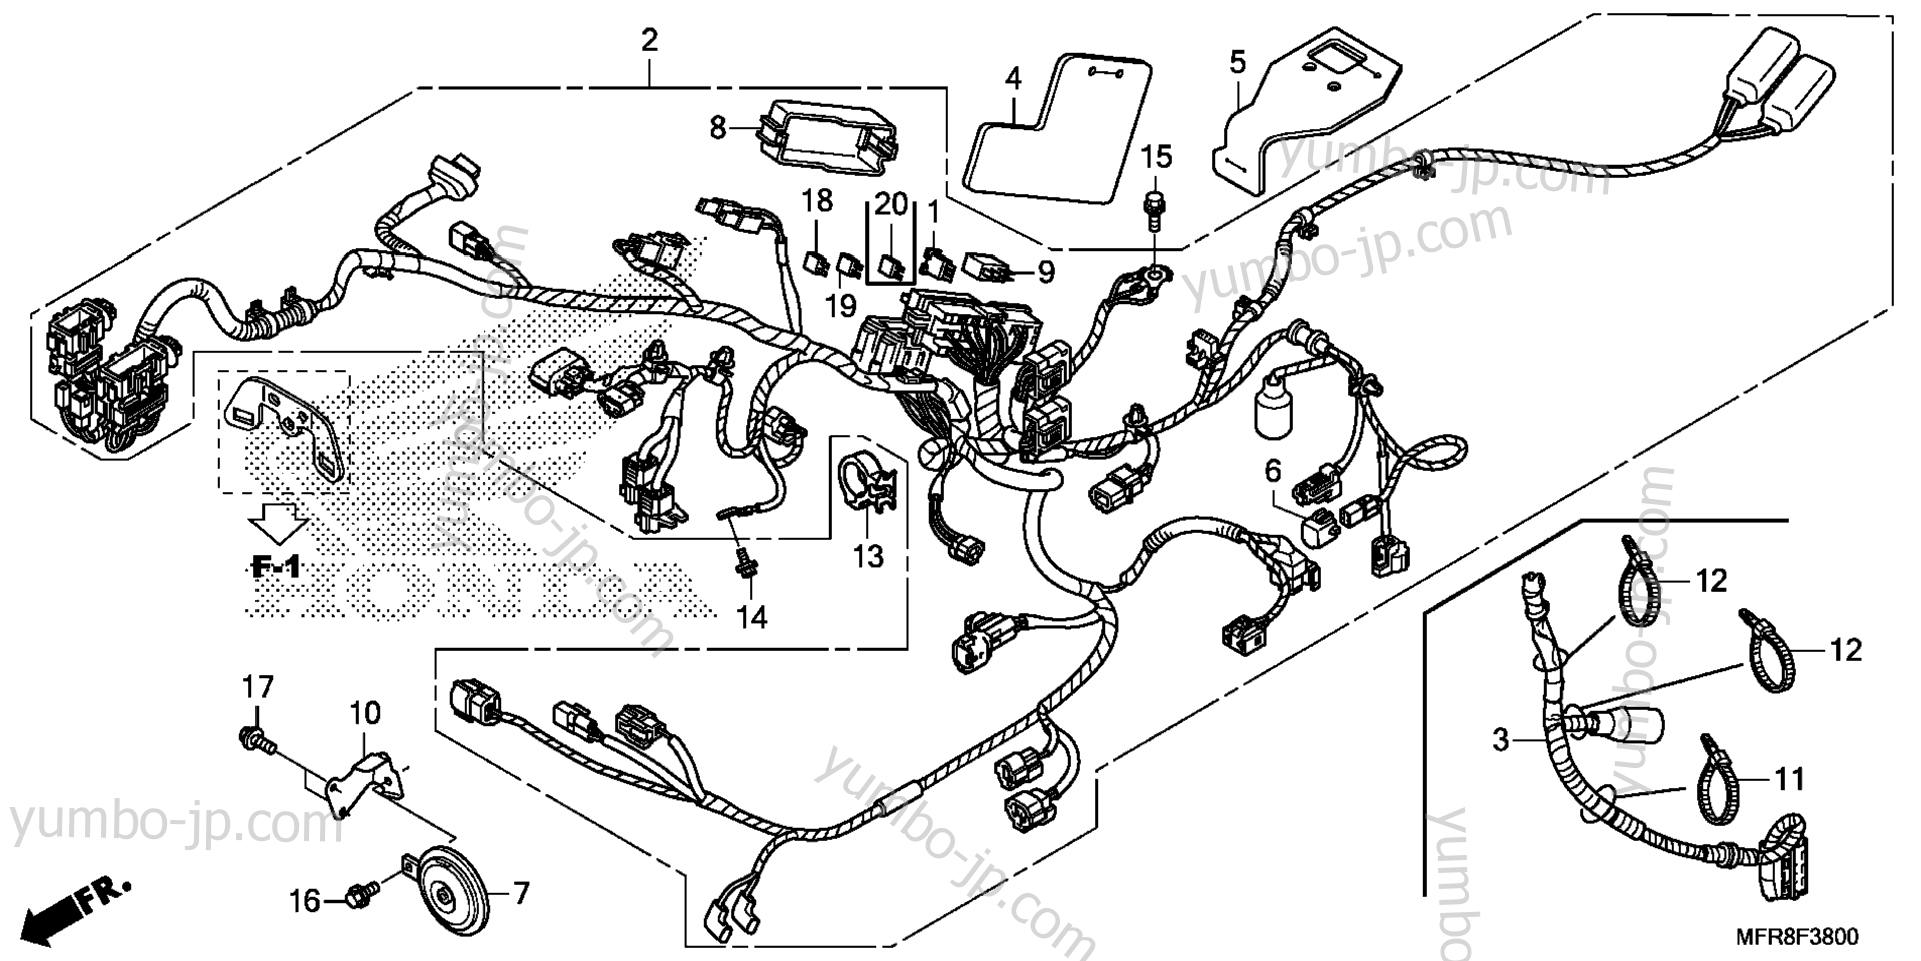 WIRE HARNESS (1) for motorcycles HONDA VT1300CTA AC 2014 year